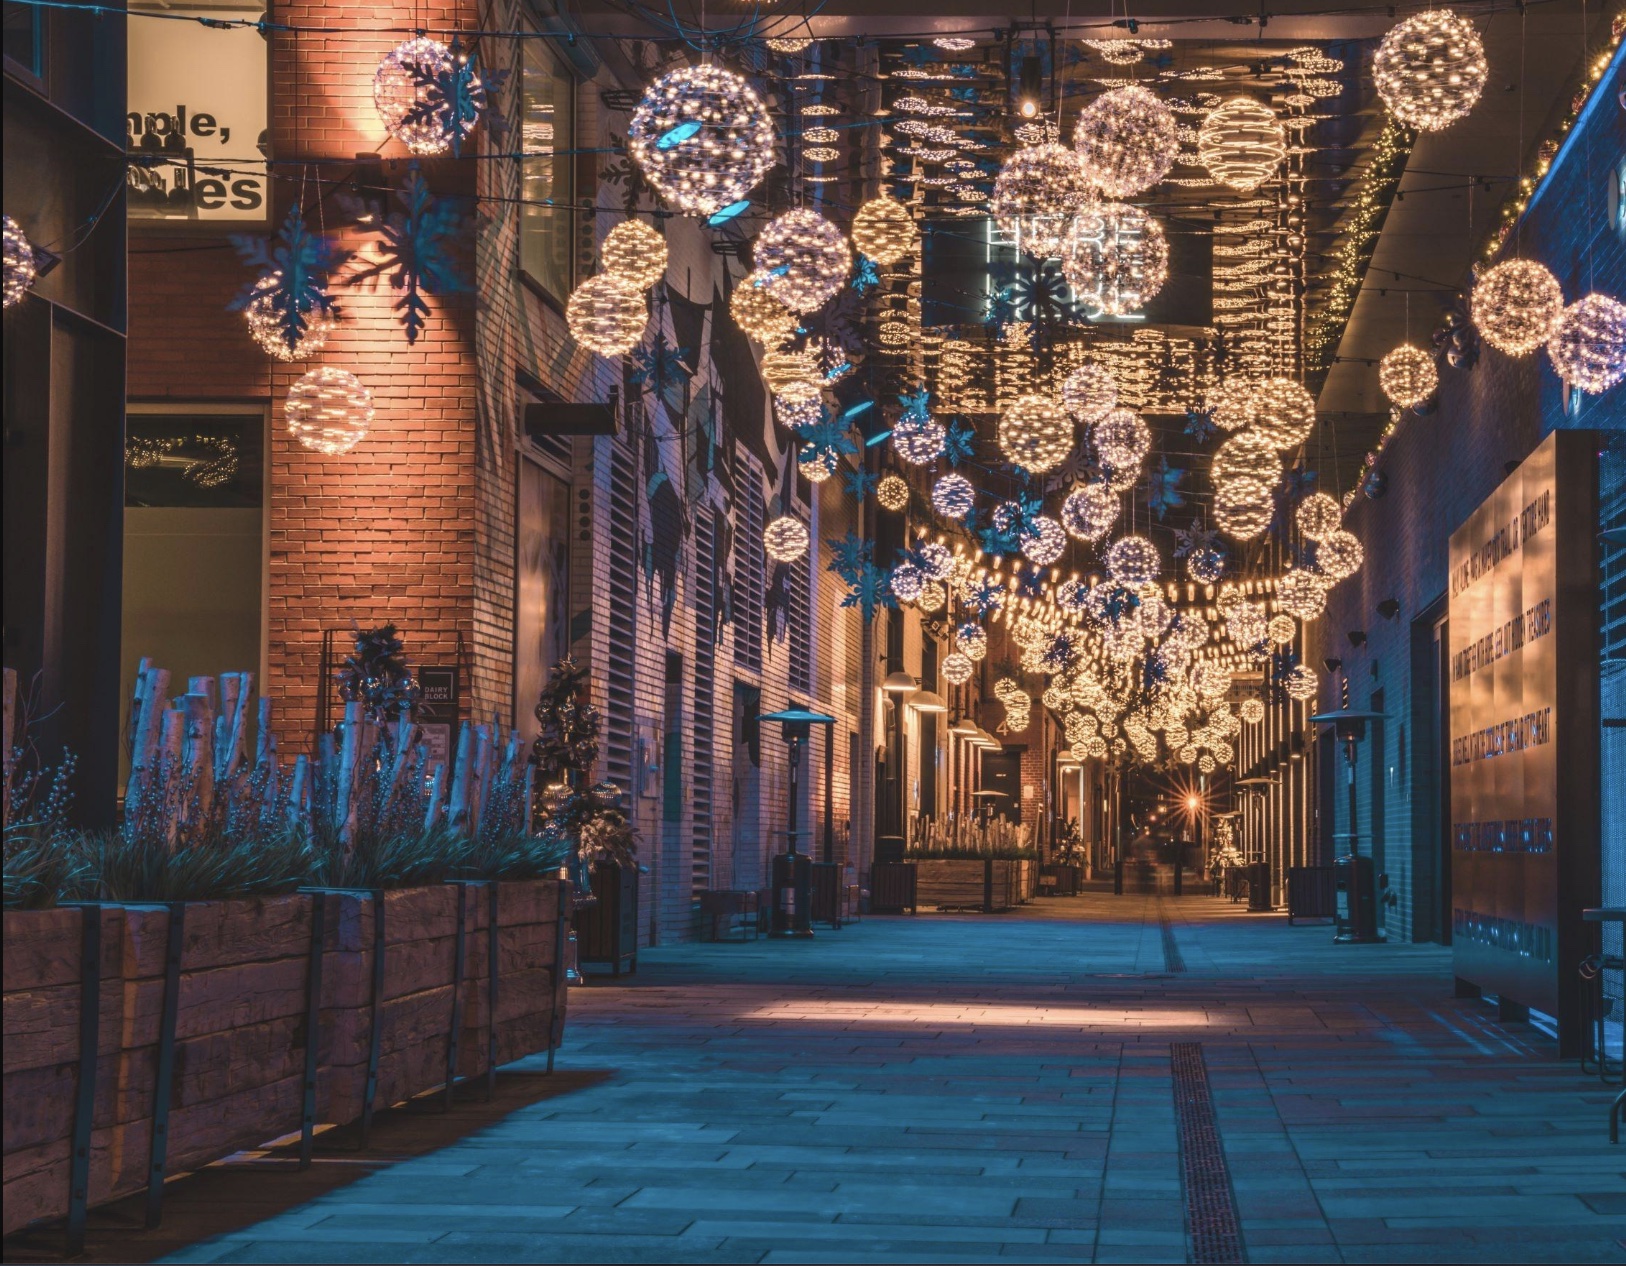 Cover Image for Image of holiday lights in an alleyway in front of Blanchard Family Wines